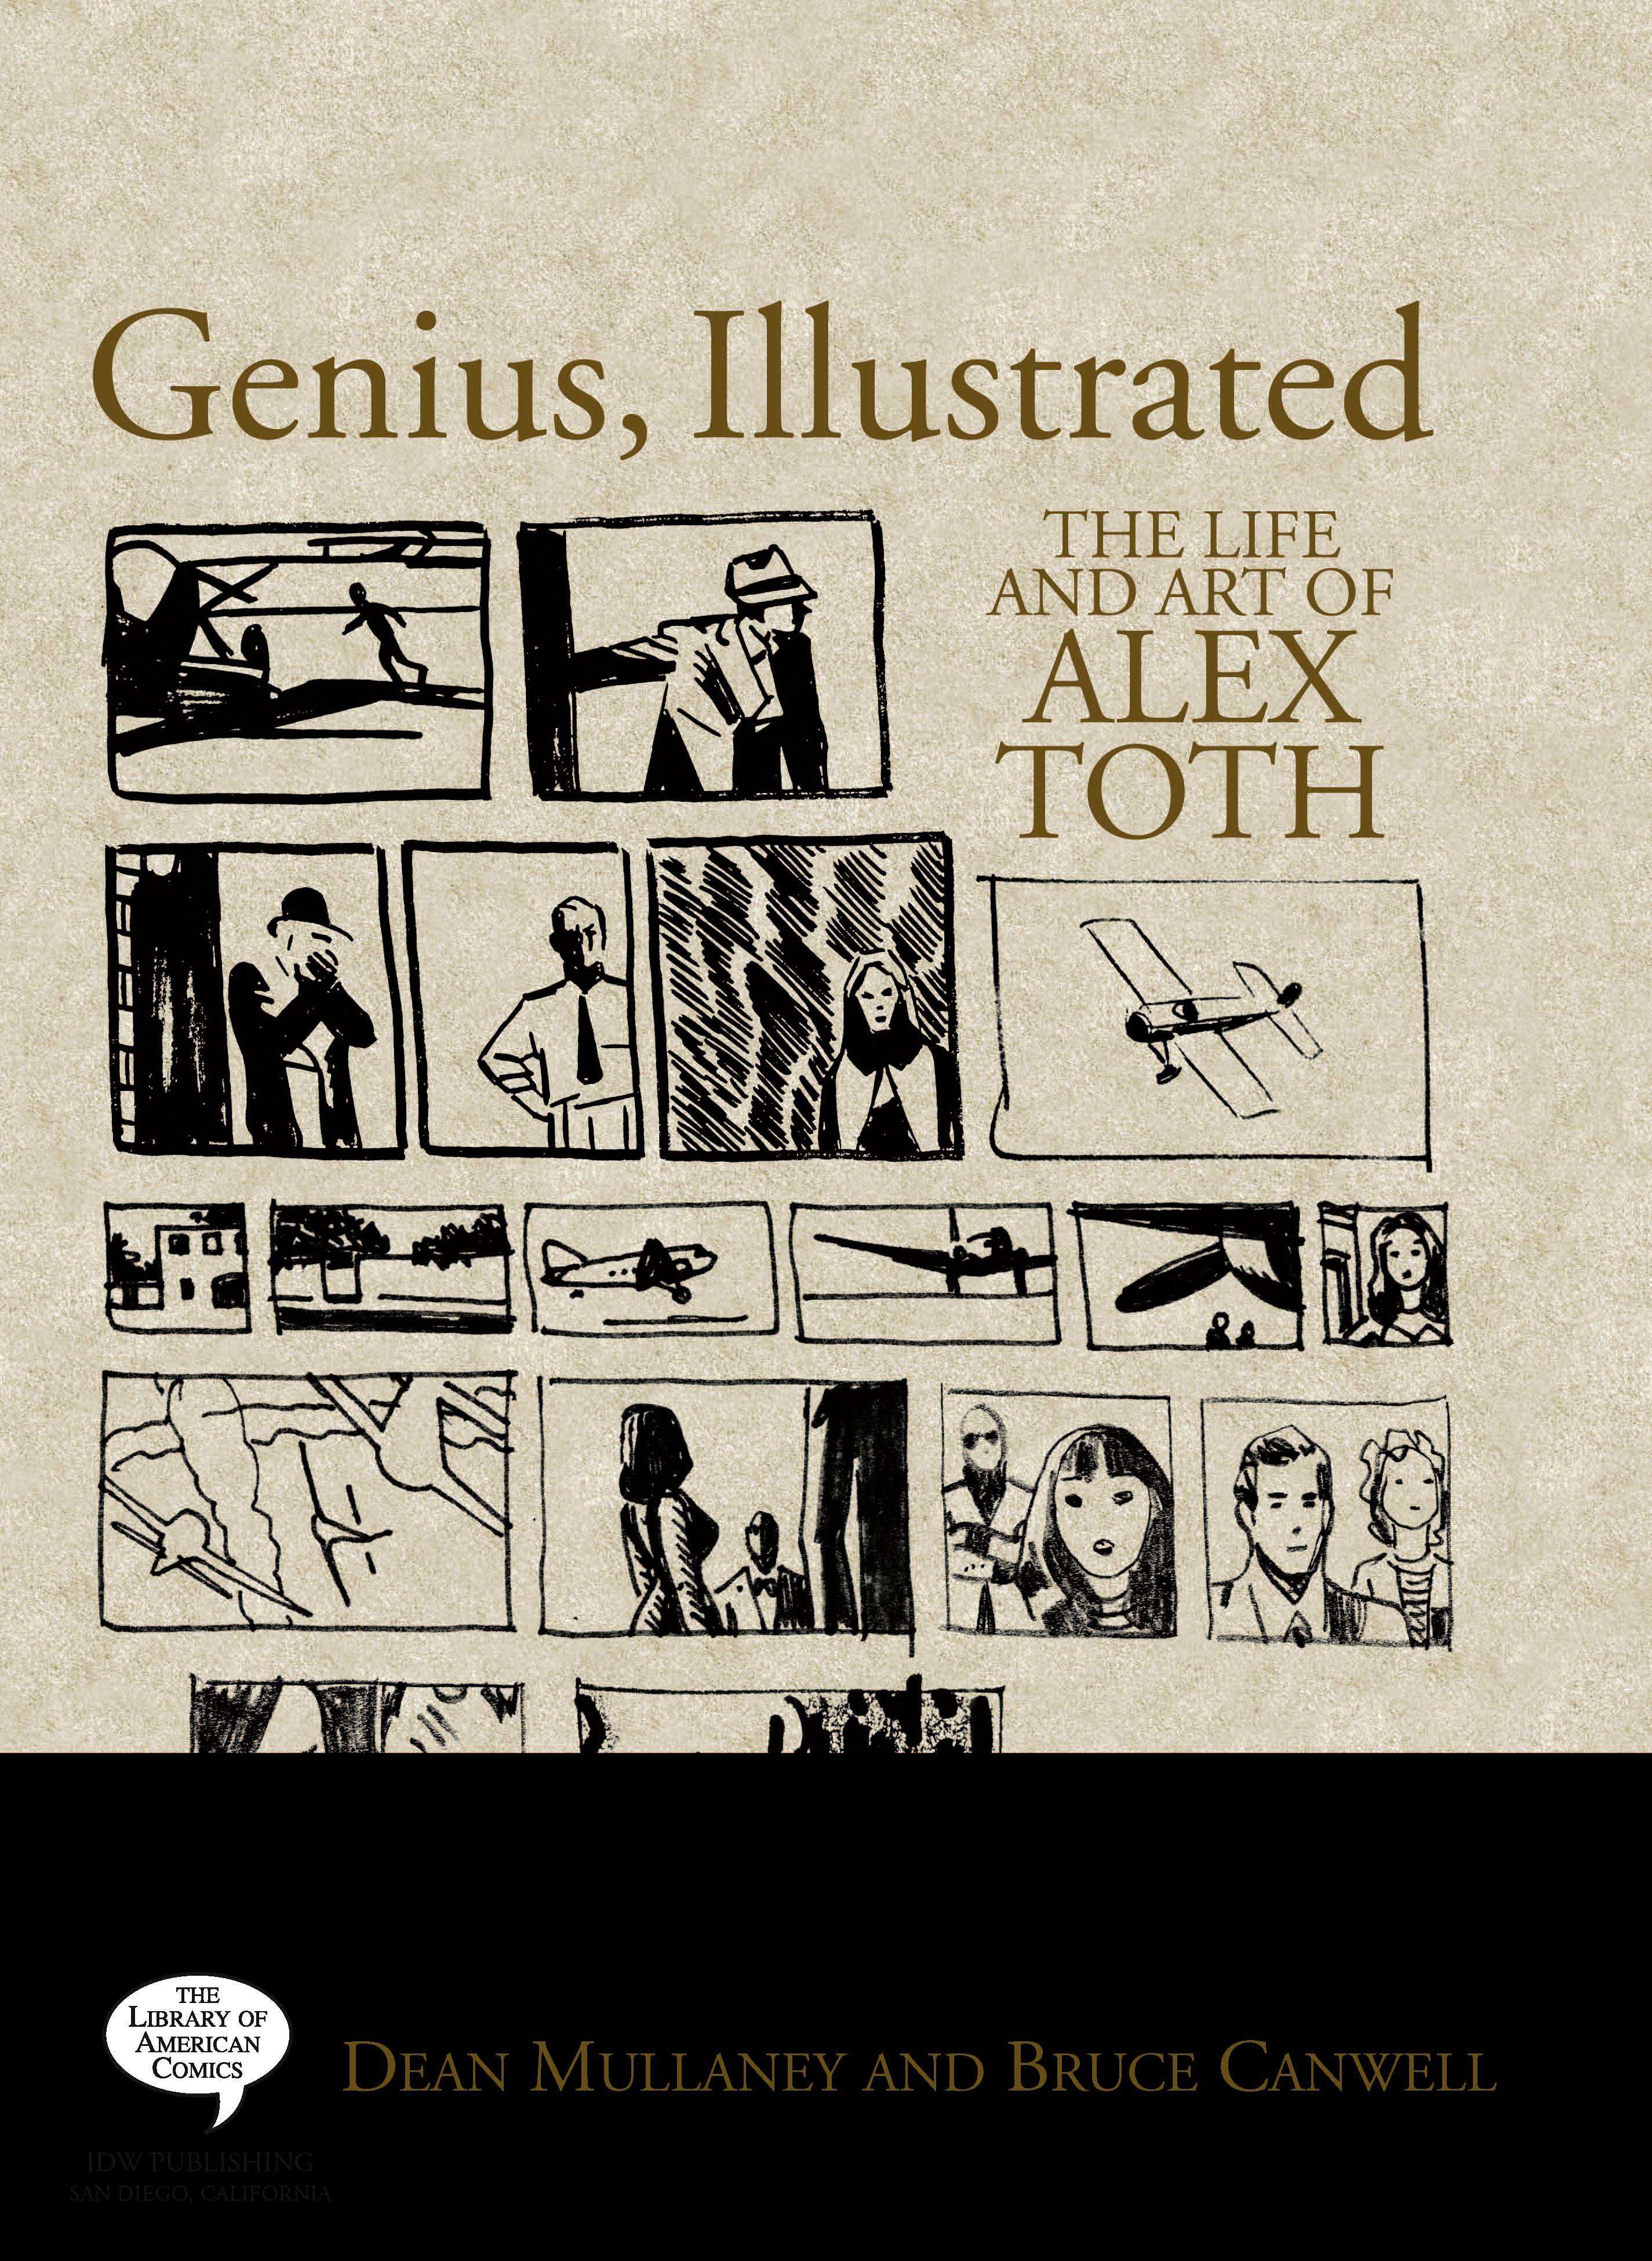 Read online Genius, Illustrated: The Life and Art of Alex Toth comic -  Issue # TPB (Part 1) - 6